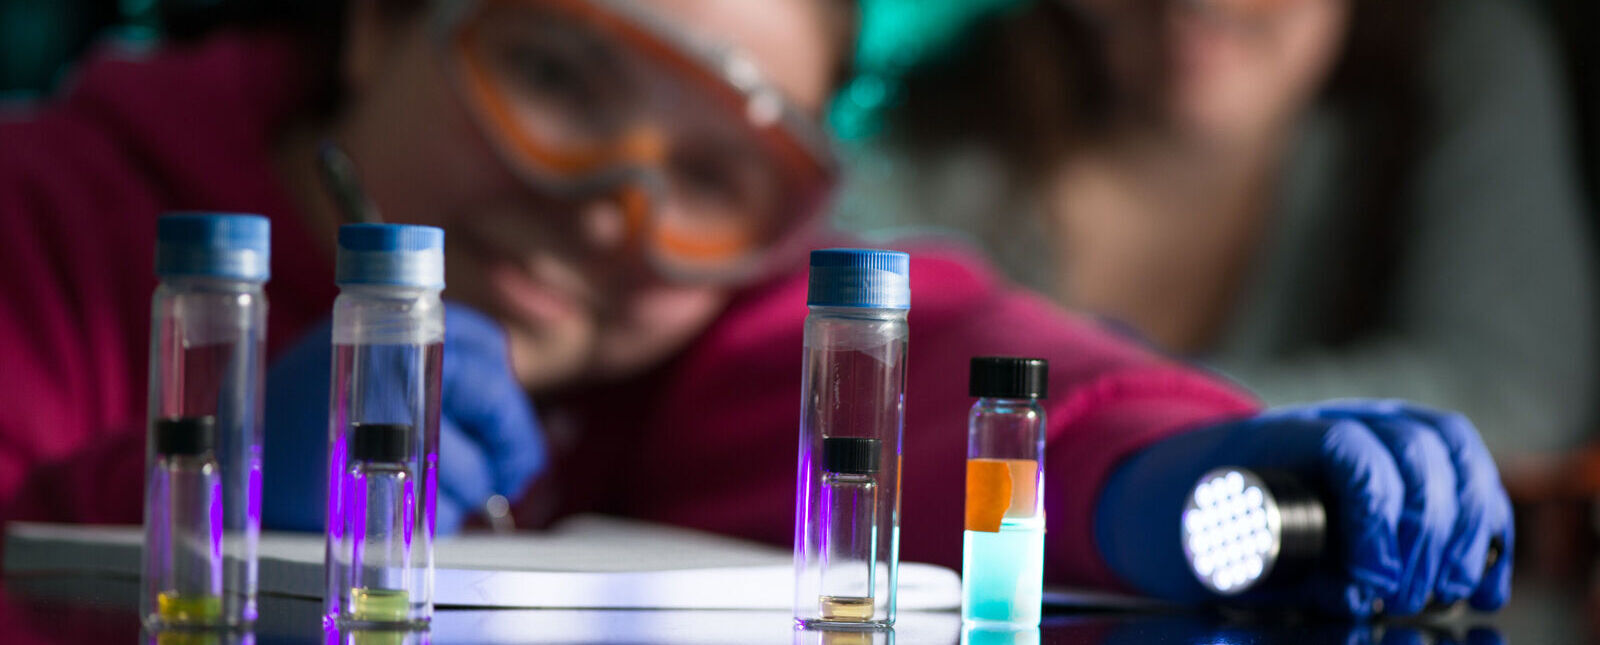 A Chemistry student shines a light on vials of different substances in a Chemistry lab